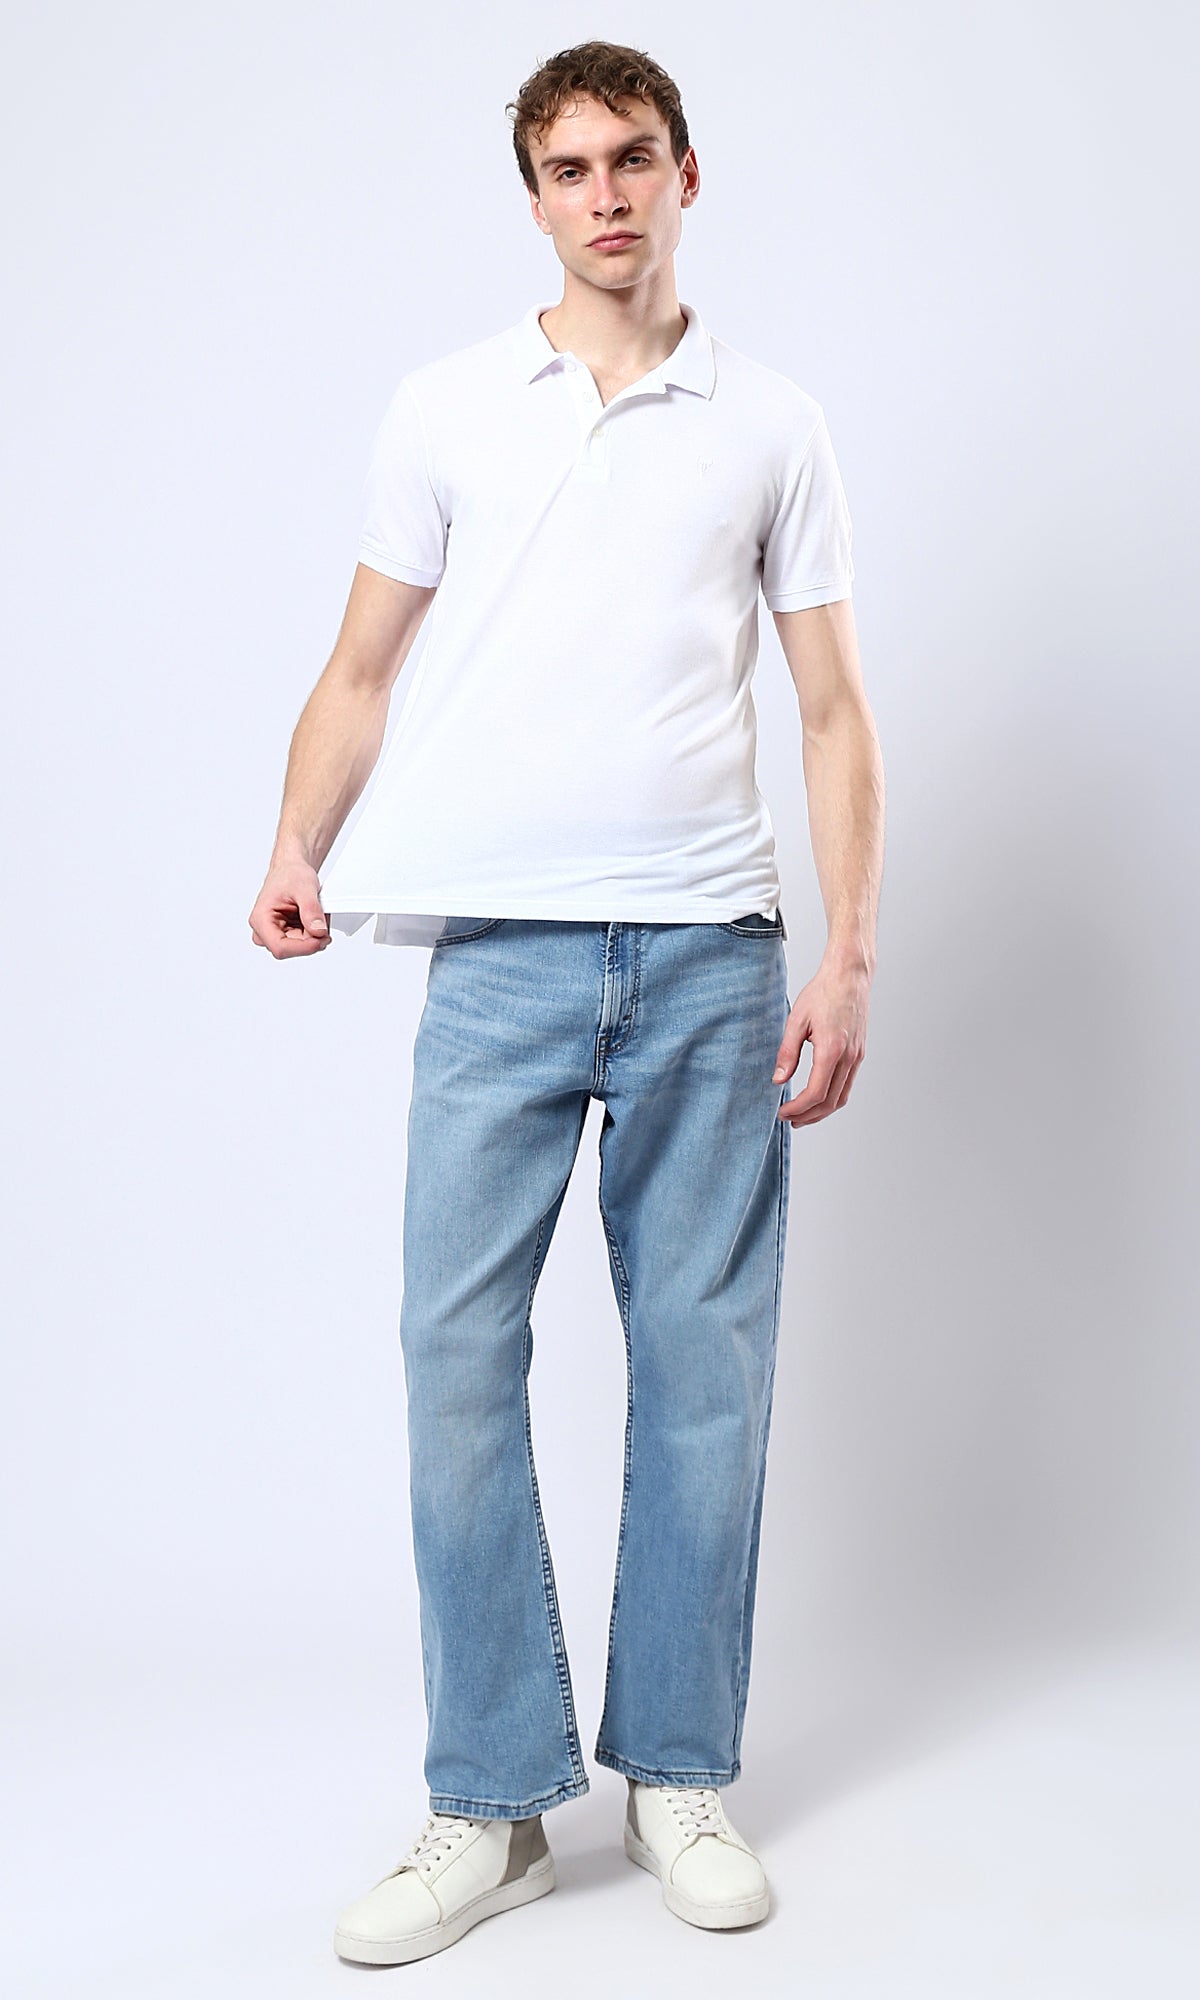 O178898 Regular Fit White Polo Shirt With Buttoned Neck